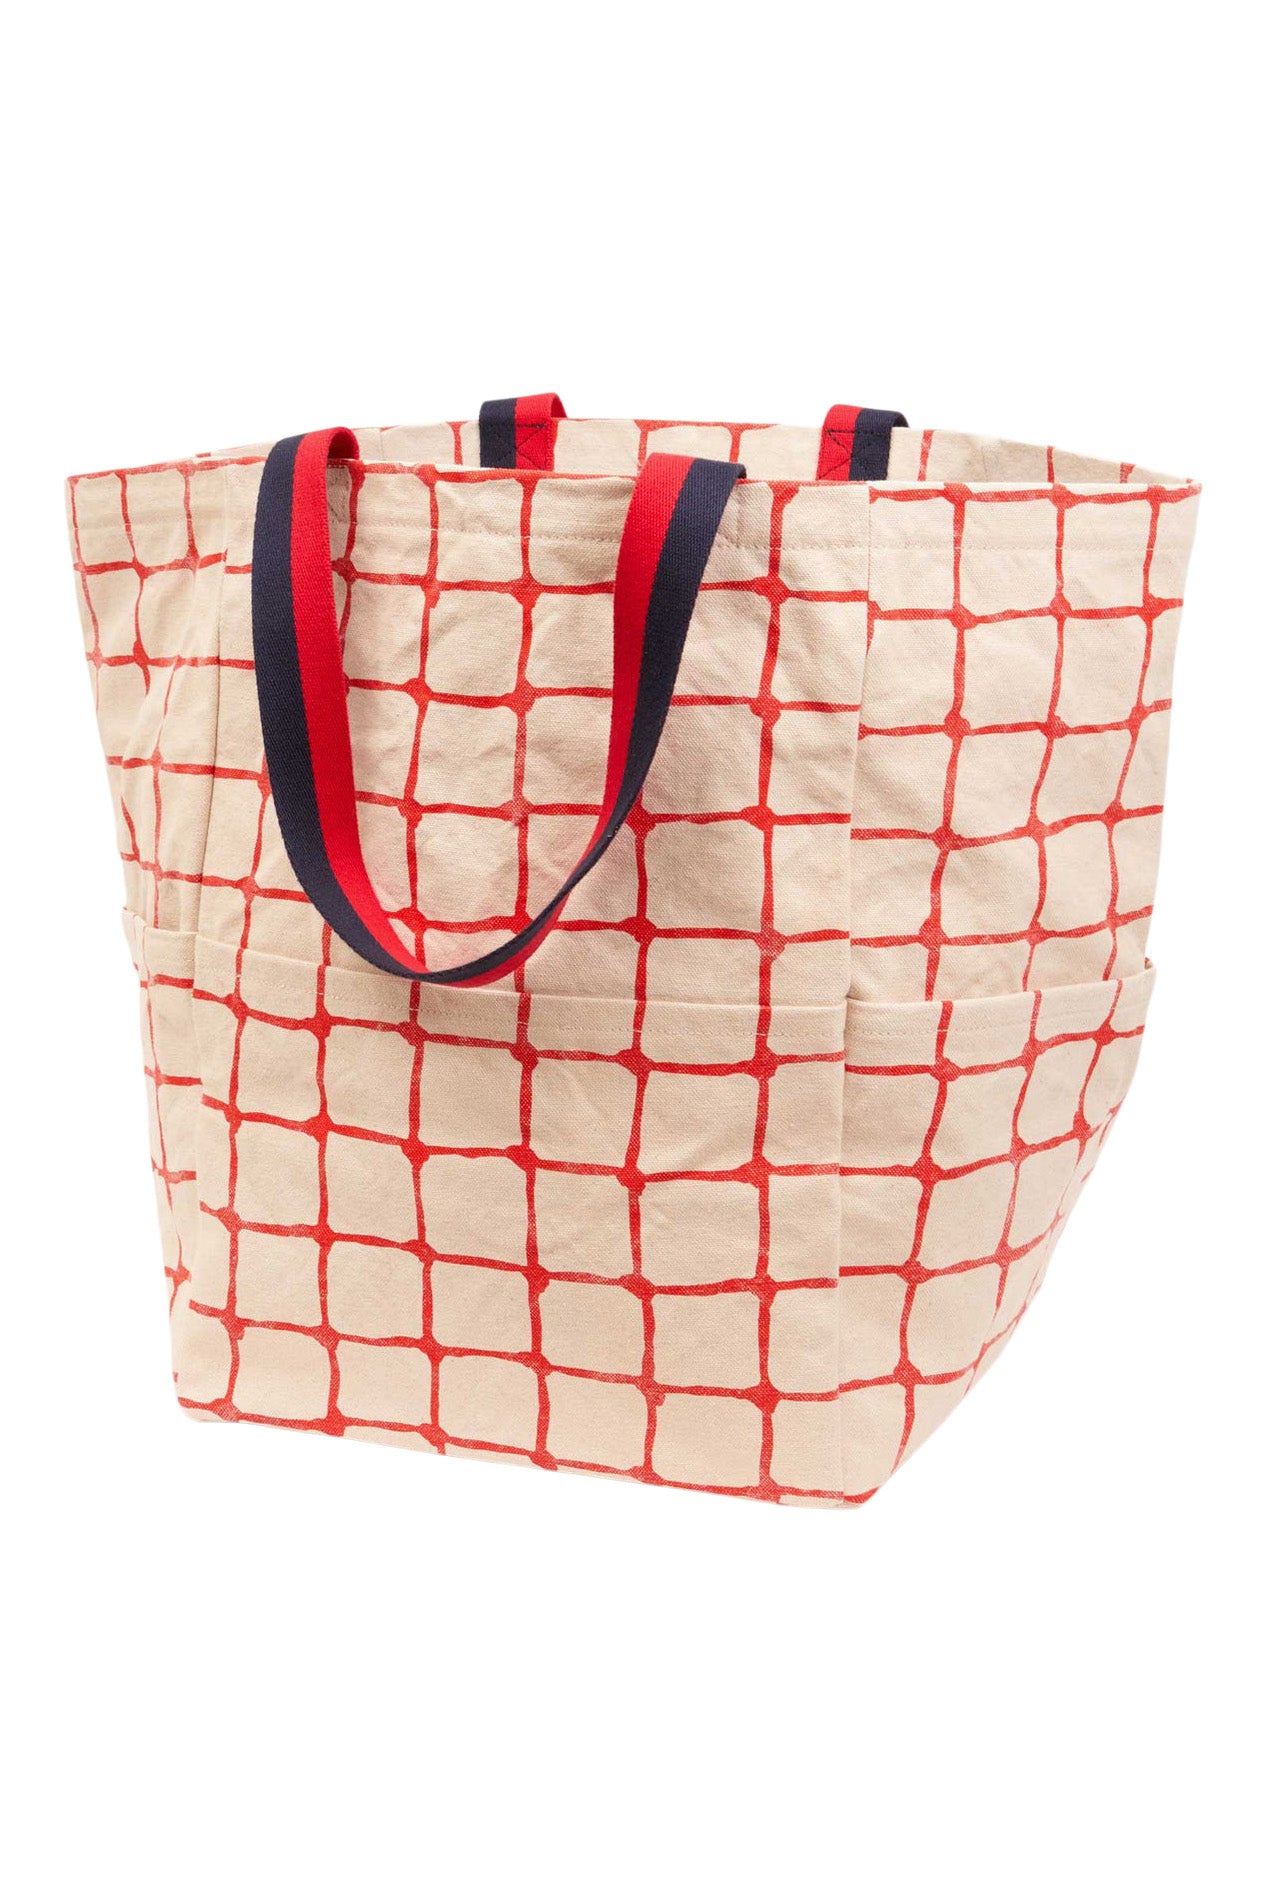 Clare V. Giant Marine Tote in Natural w/ Bright Poppy Net Printed Canvas